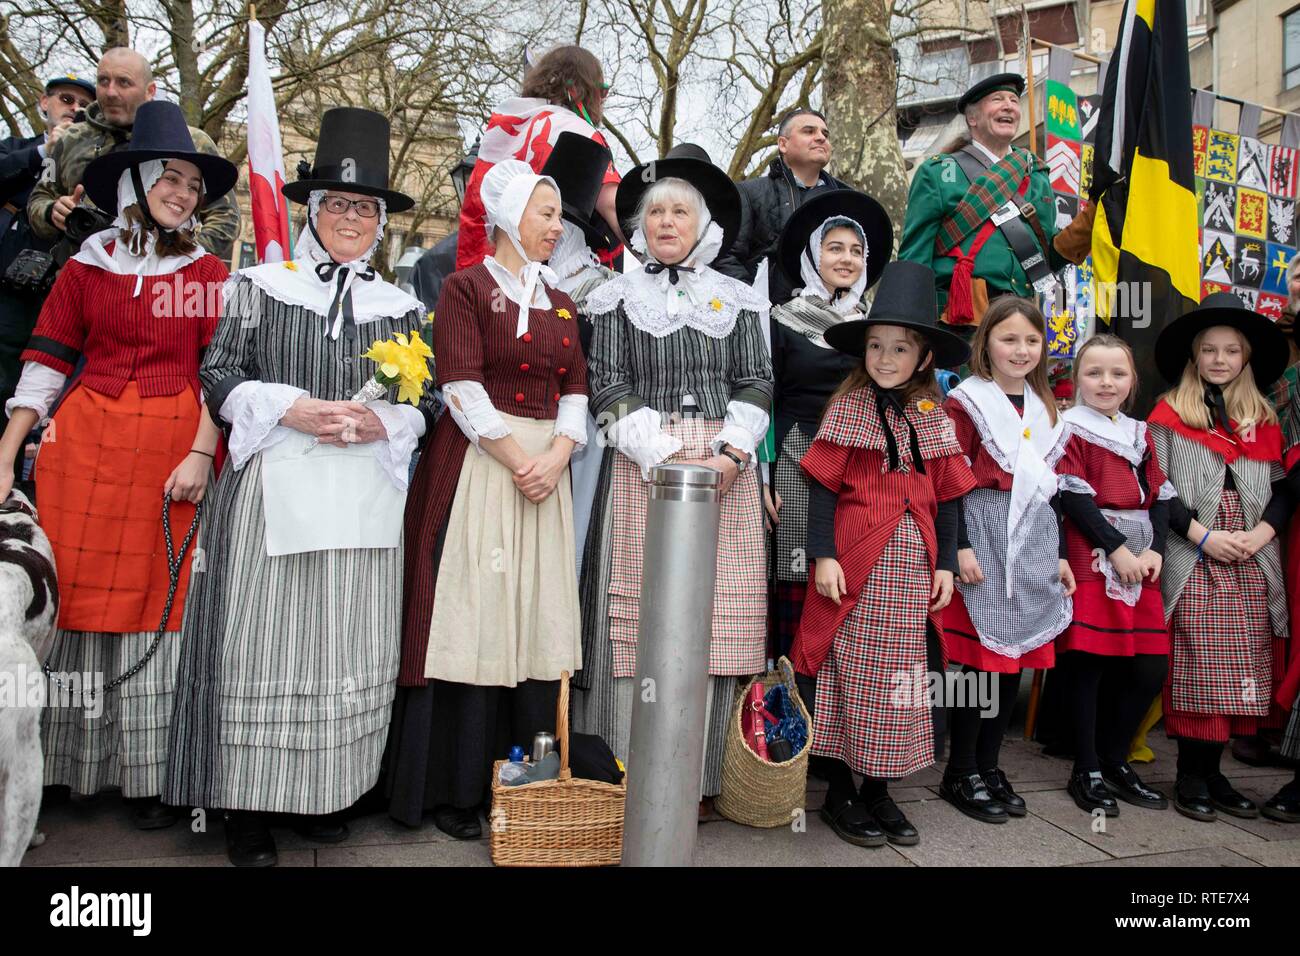 British National Costumes In English National Dress | rootsacademy.co.in